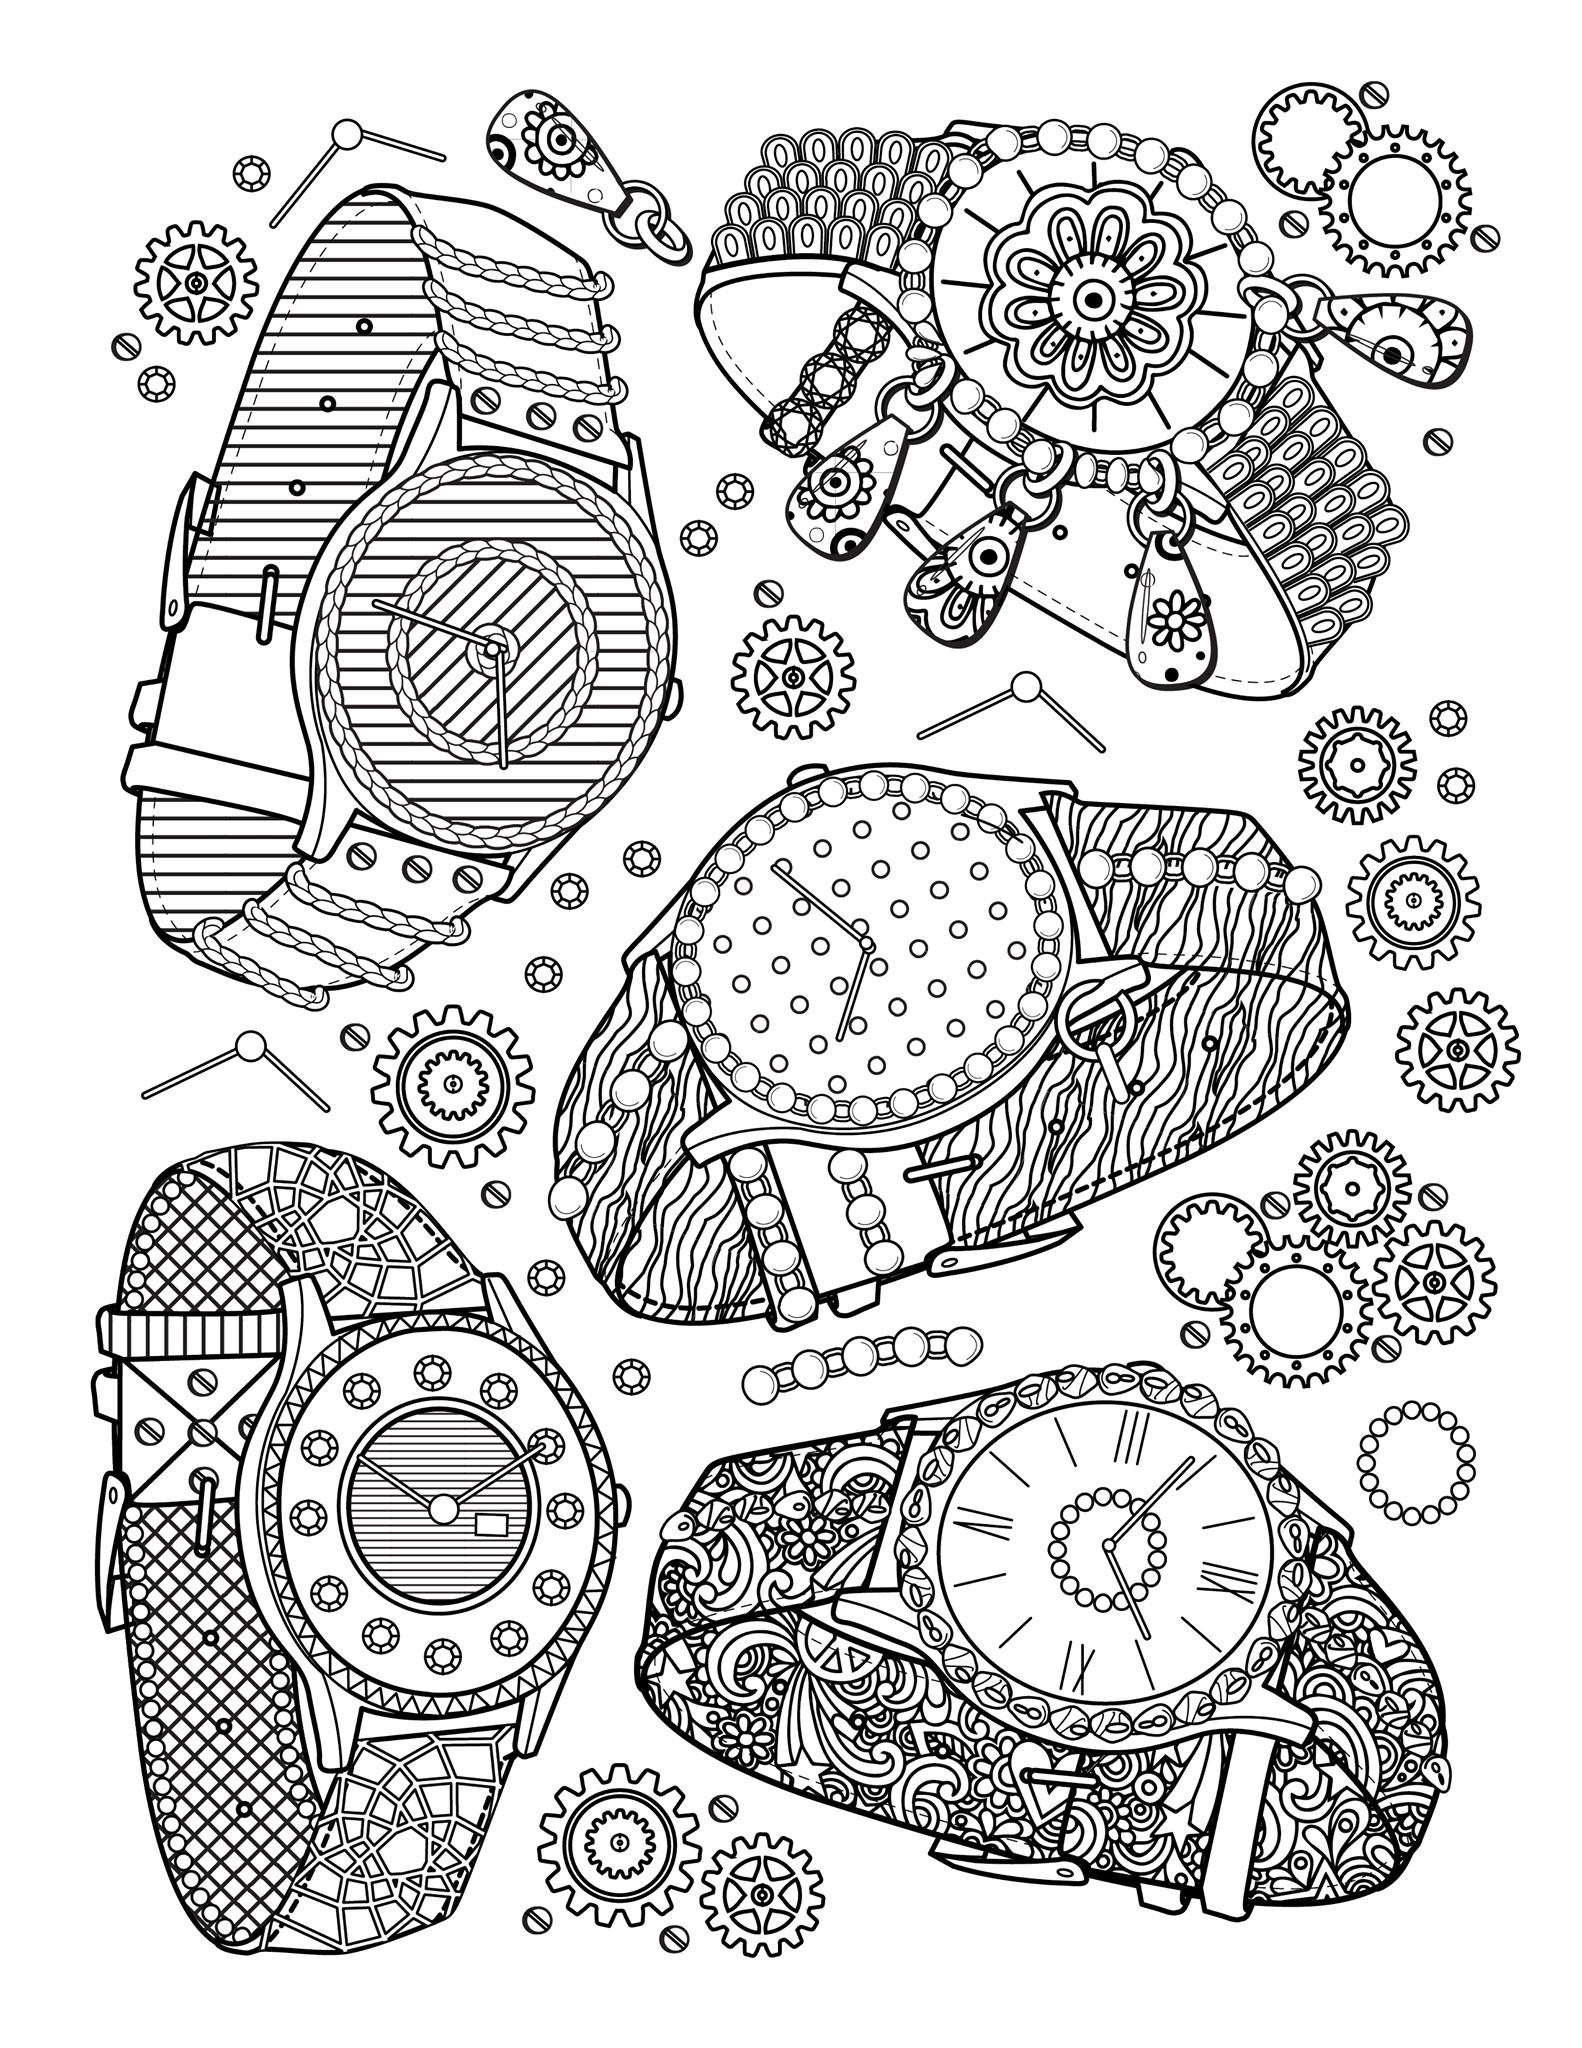 Fashion Adult Coloring Books
 Book jewelry watches Fashion Adult Coloring Pages